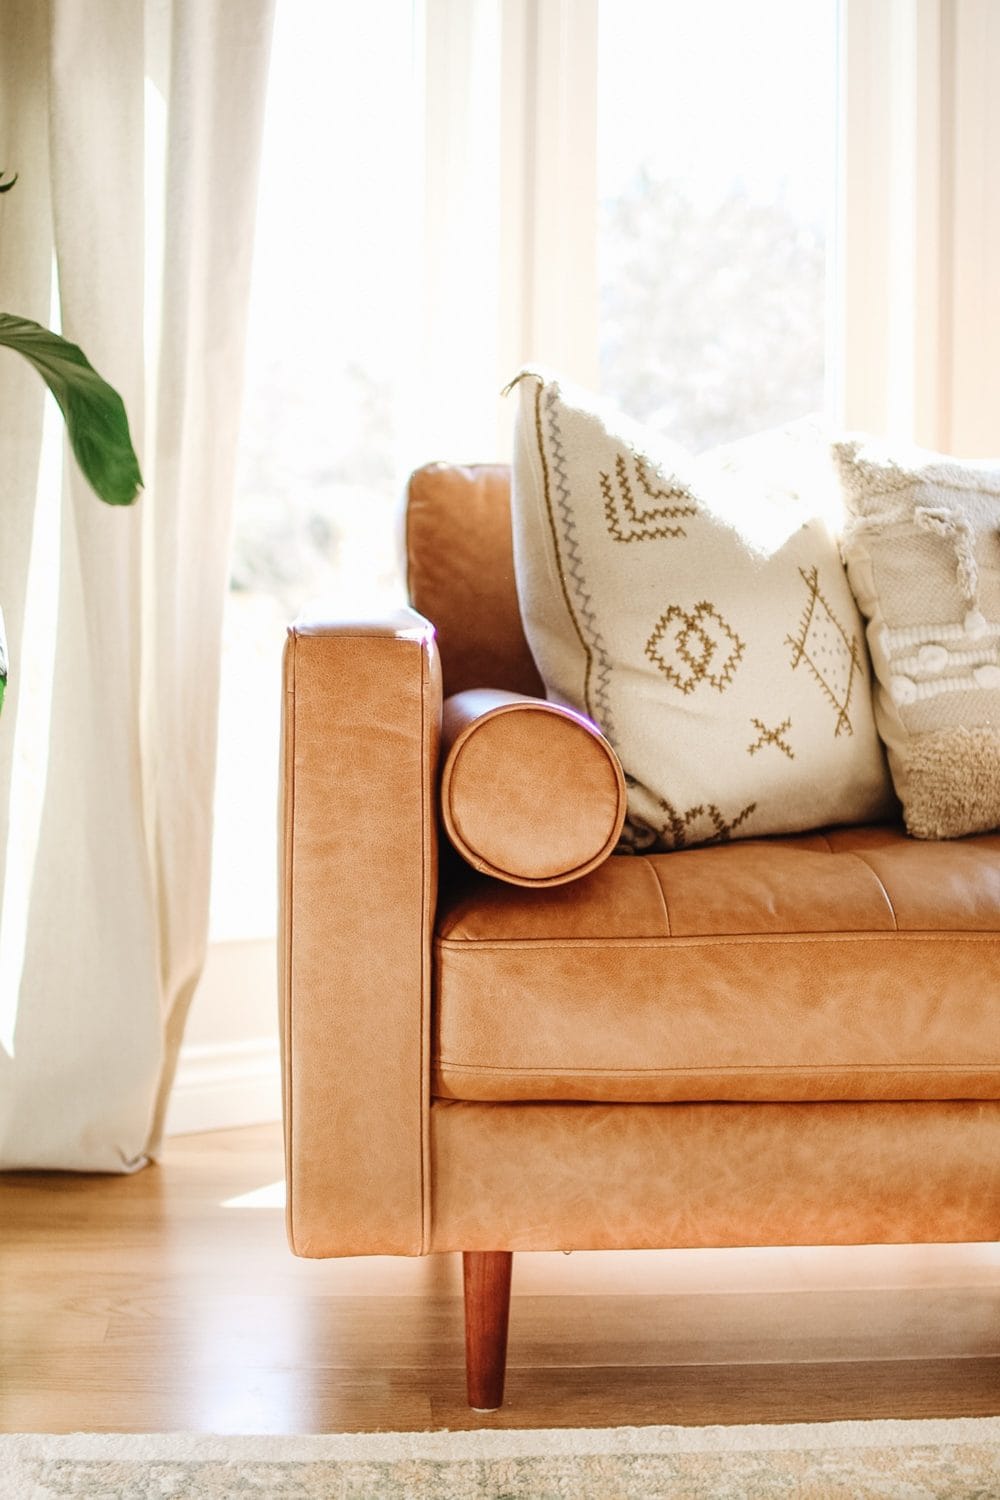 10 Pillow Combinations For Brown Couch, What Color Cushions Go With Dark Brown Leather Sofas